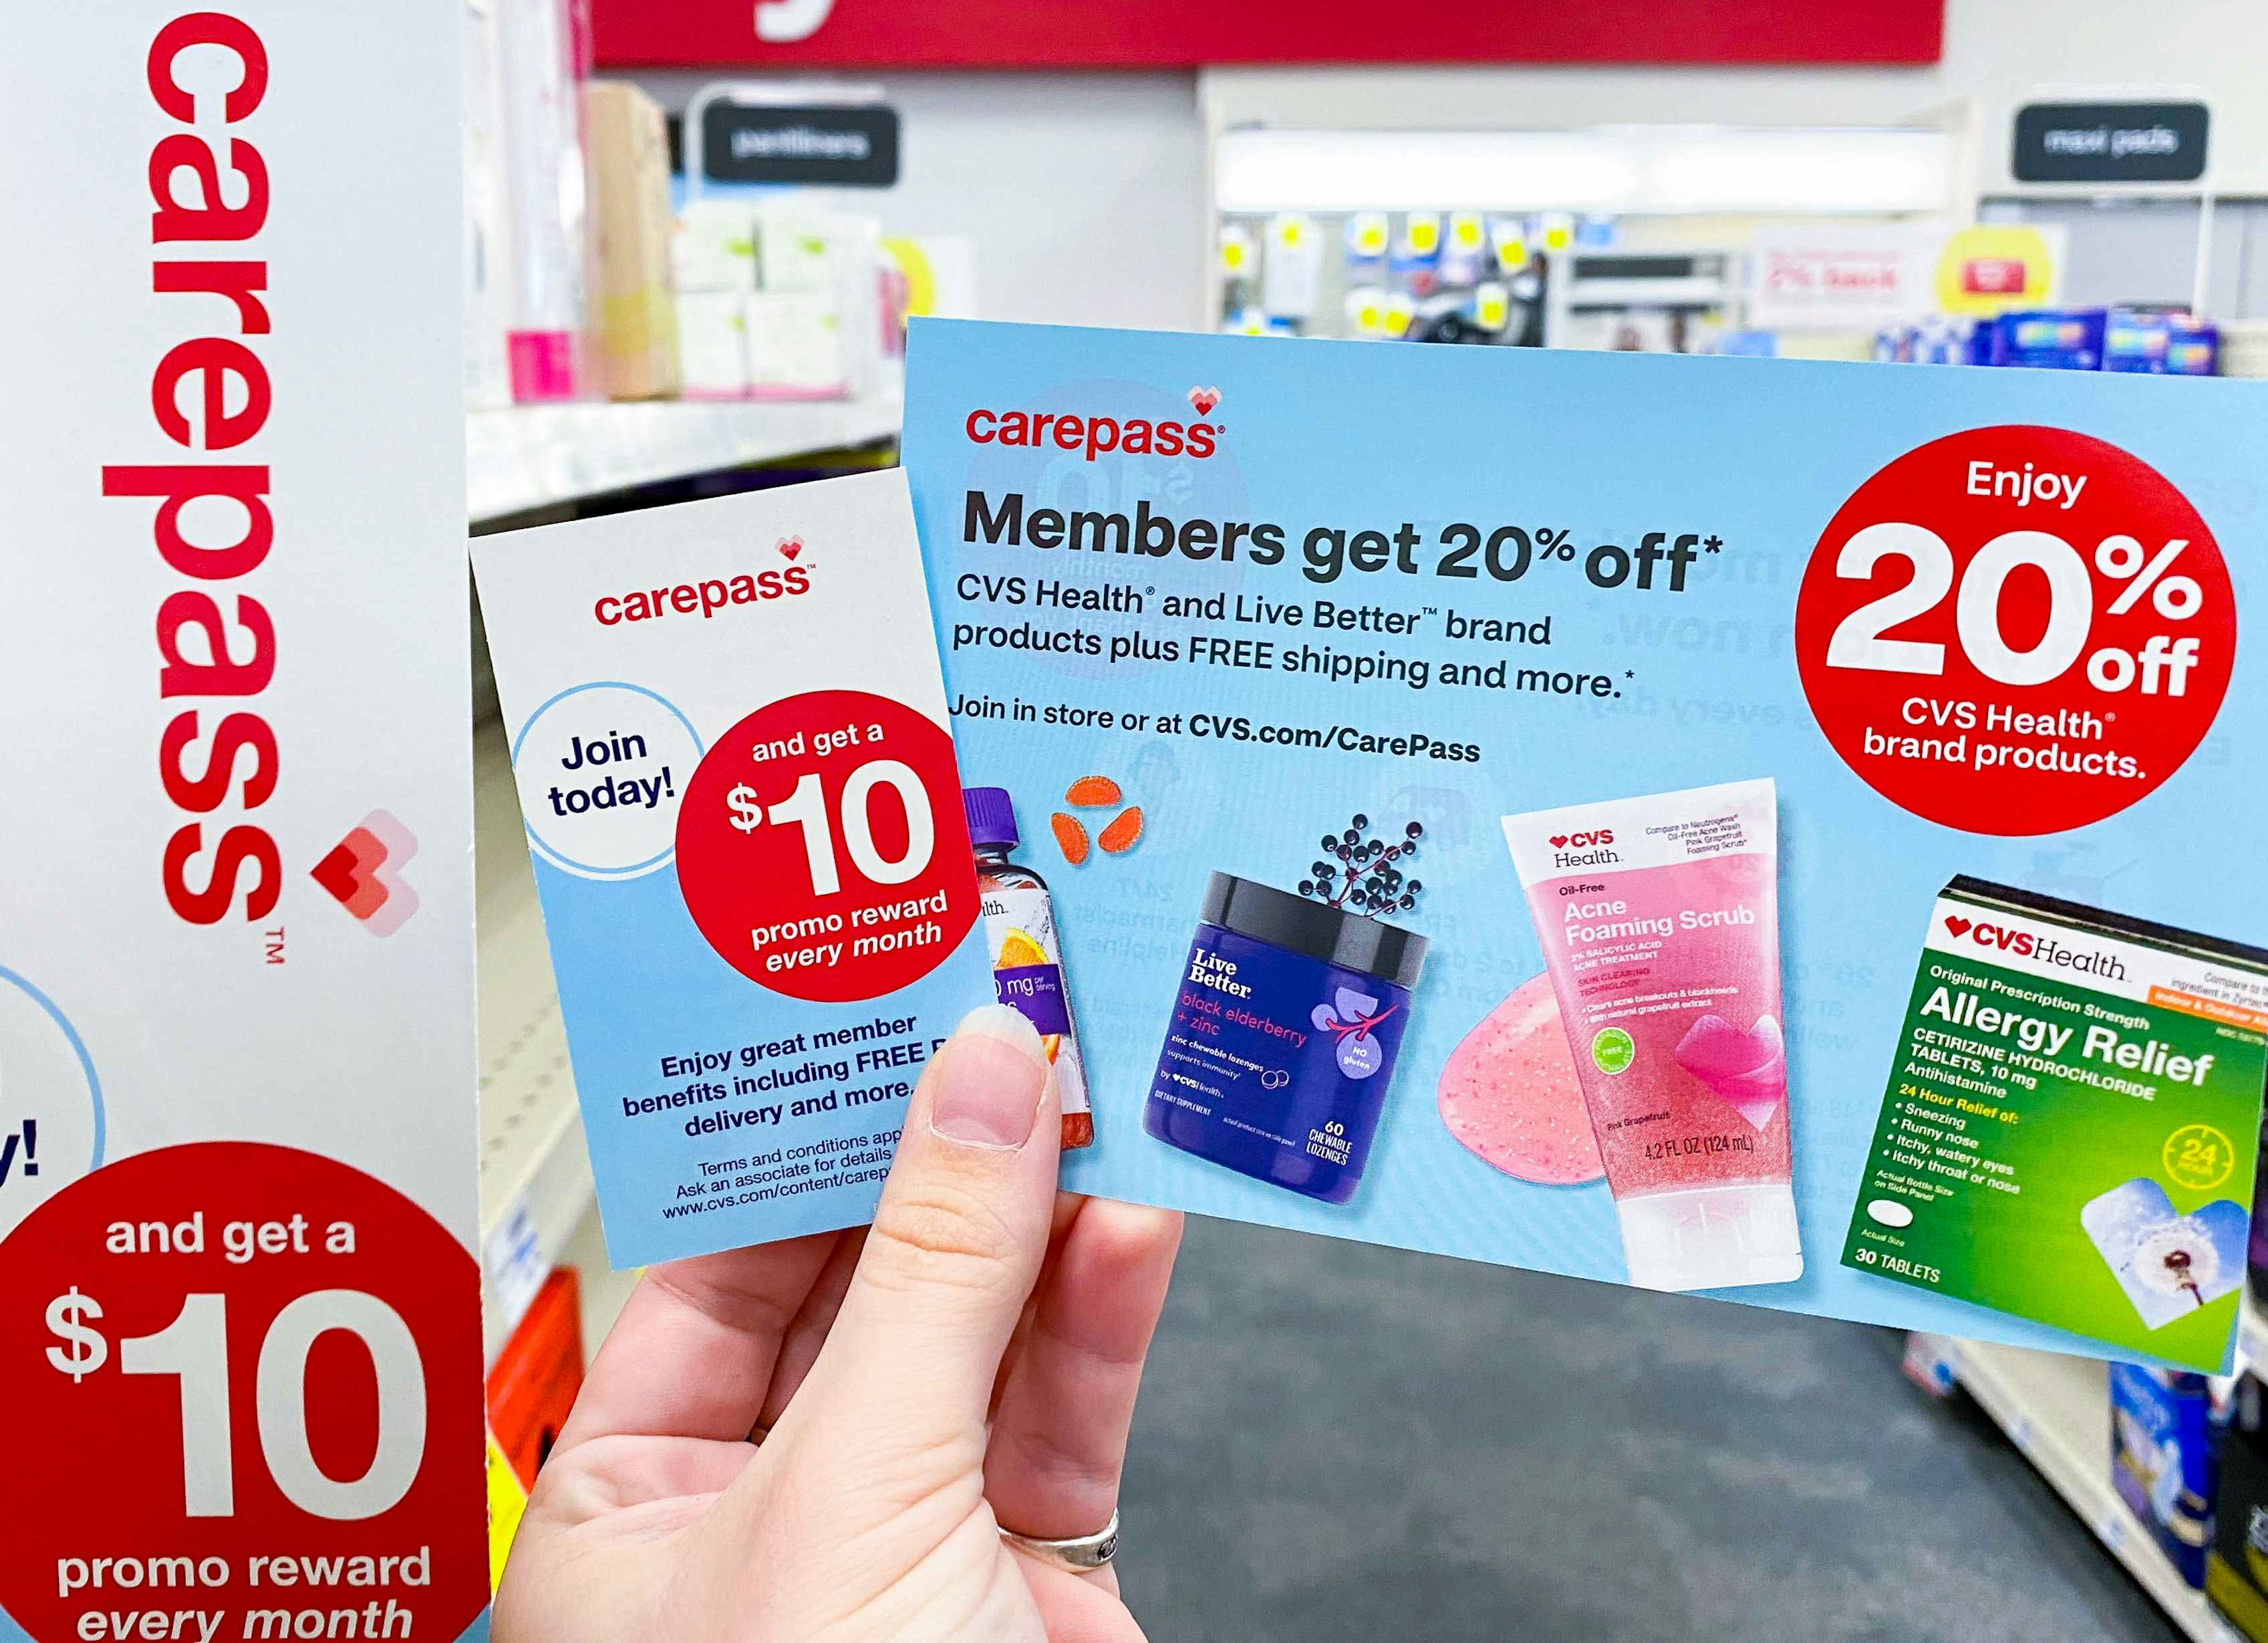 23 Tricks For Getting CVS Discounts & Freebies - The Krazy Coupon Lady